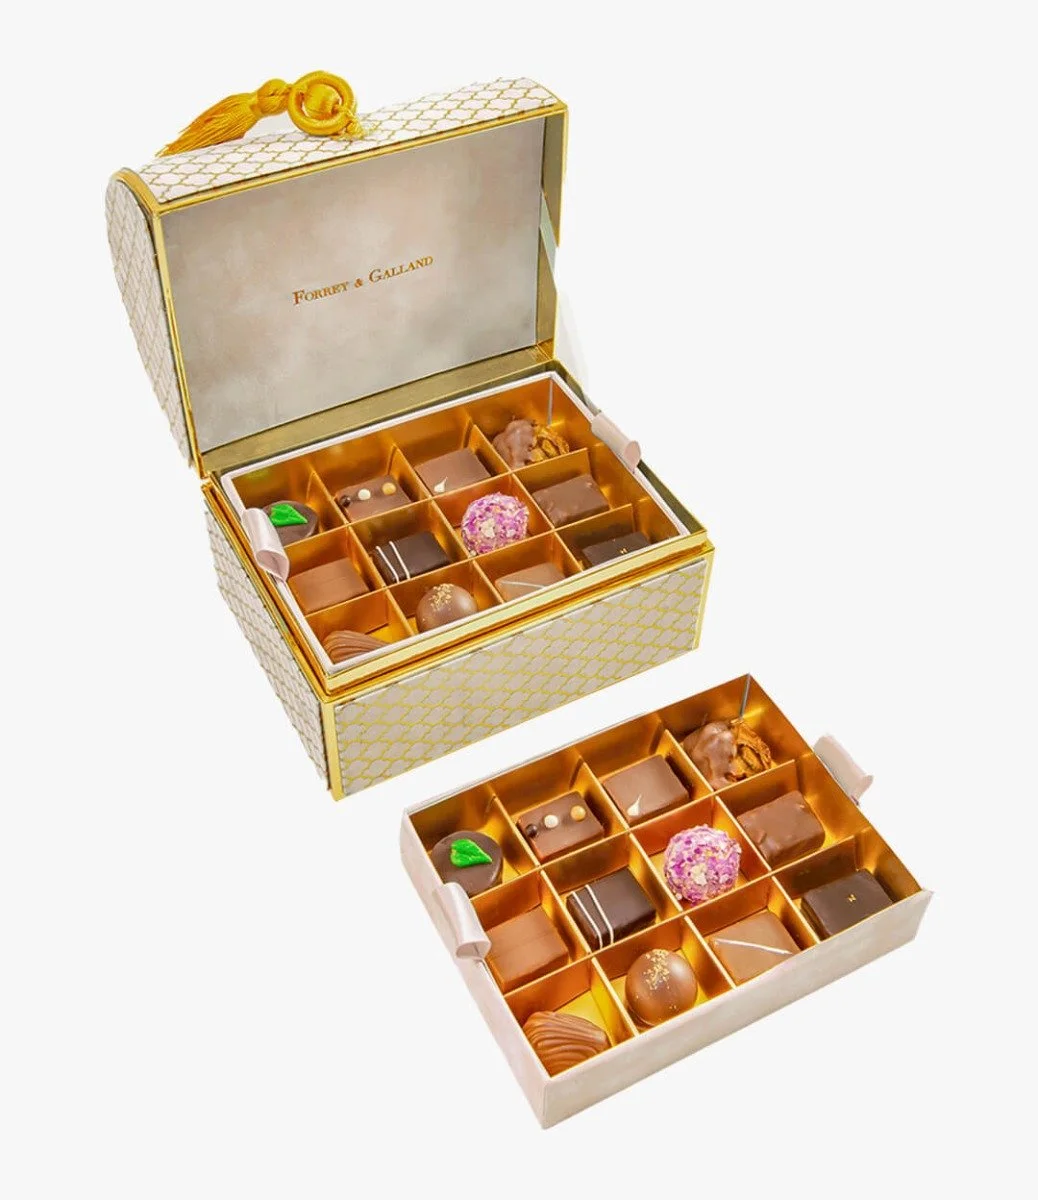 24-pcs Chest of Chocolate by Forrey & Galland 